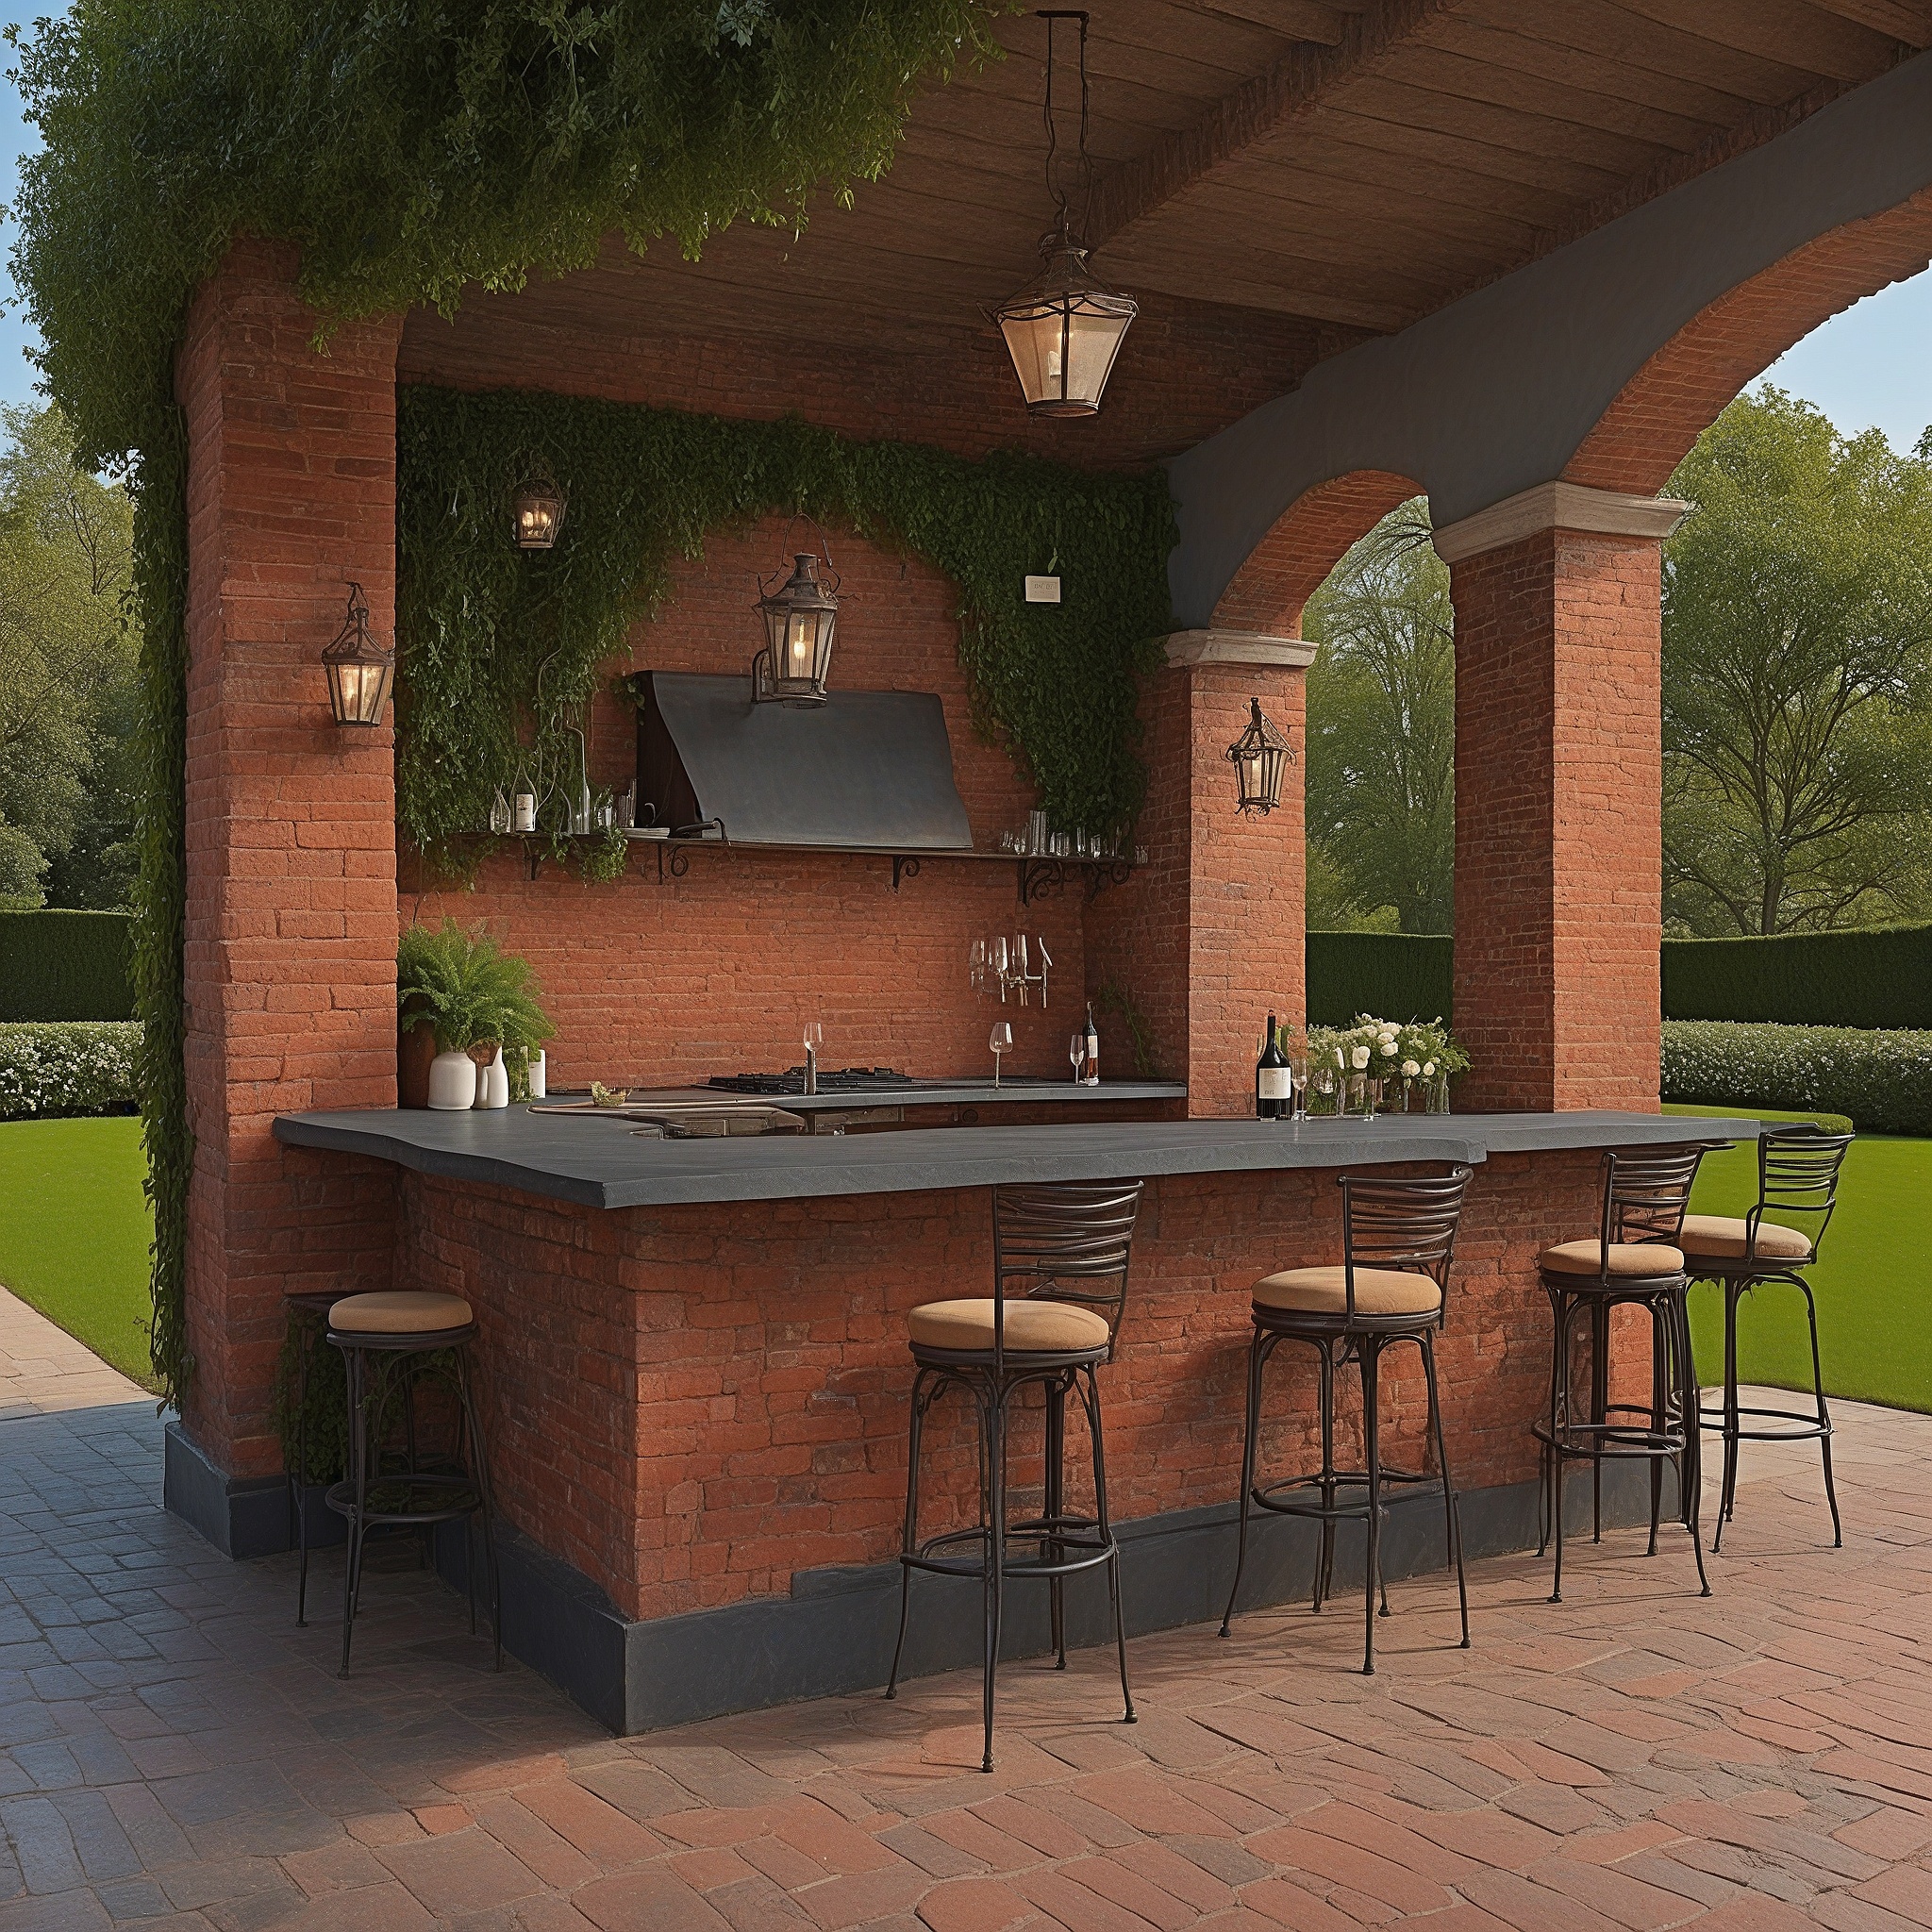 Brick Bar And Grill With Ivy-Covered Walls And Slate Countertop